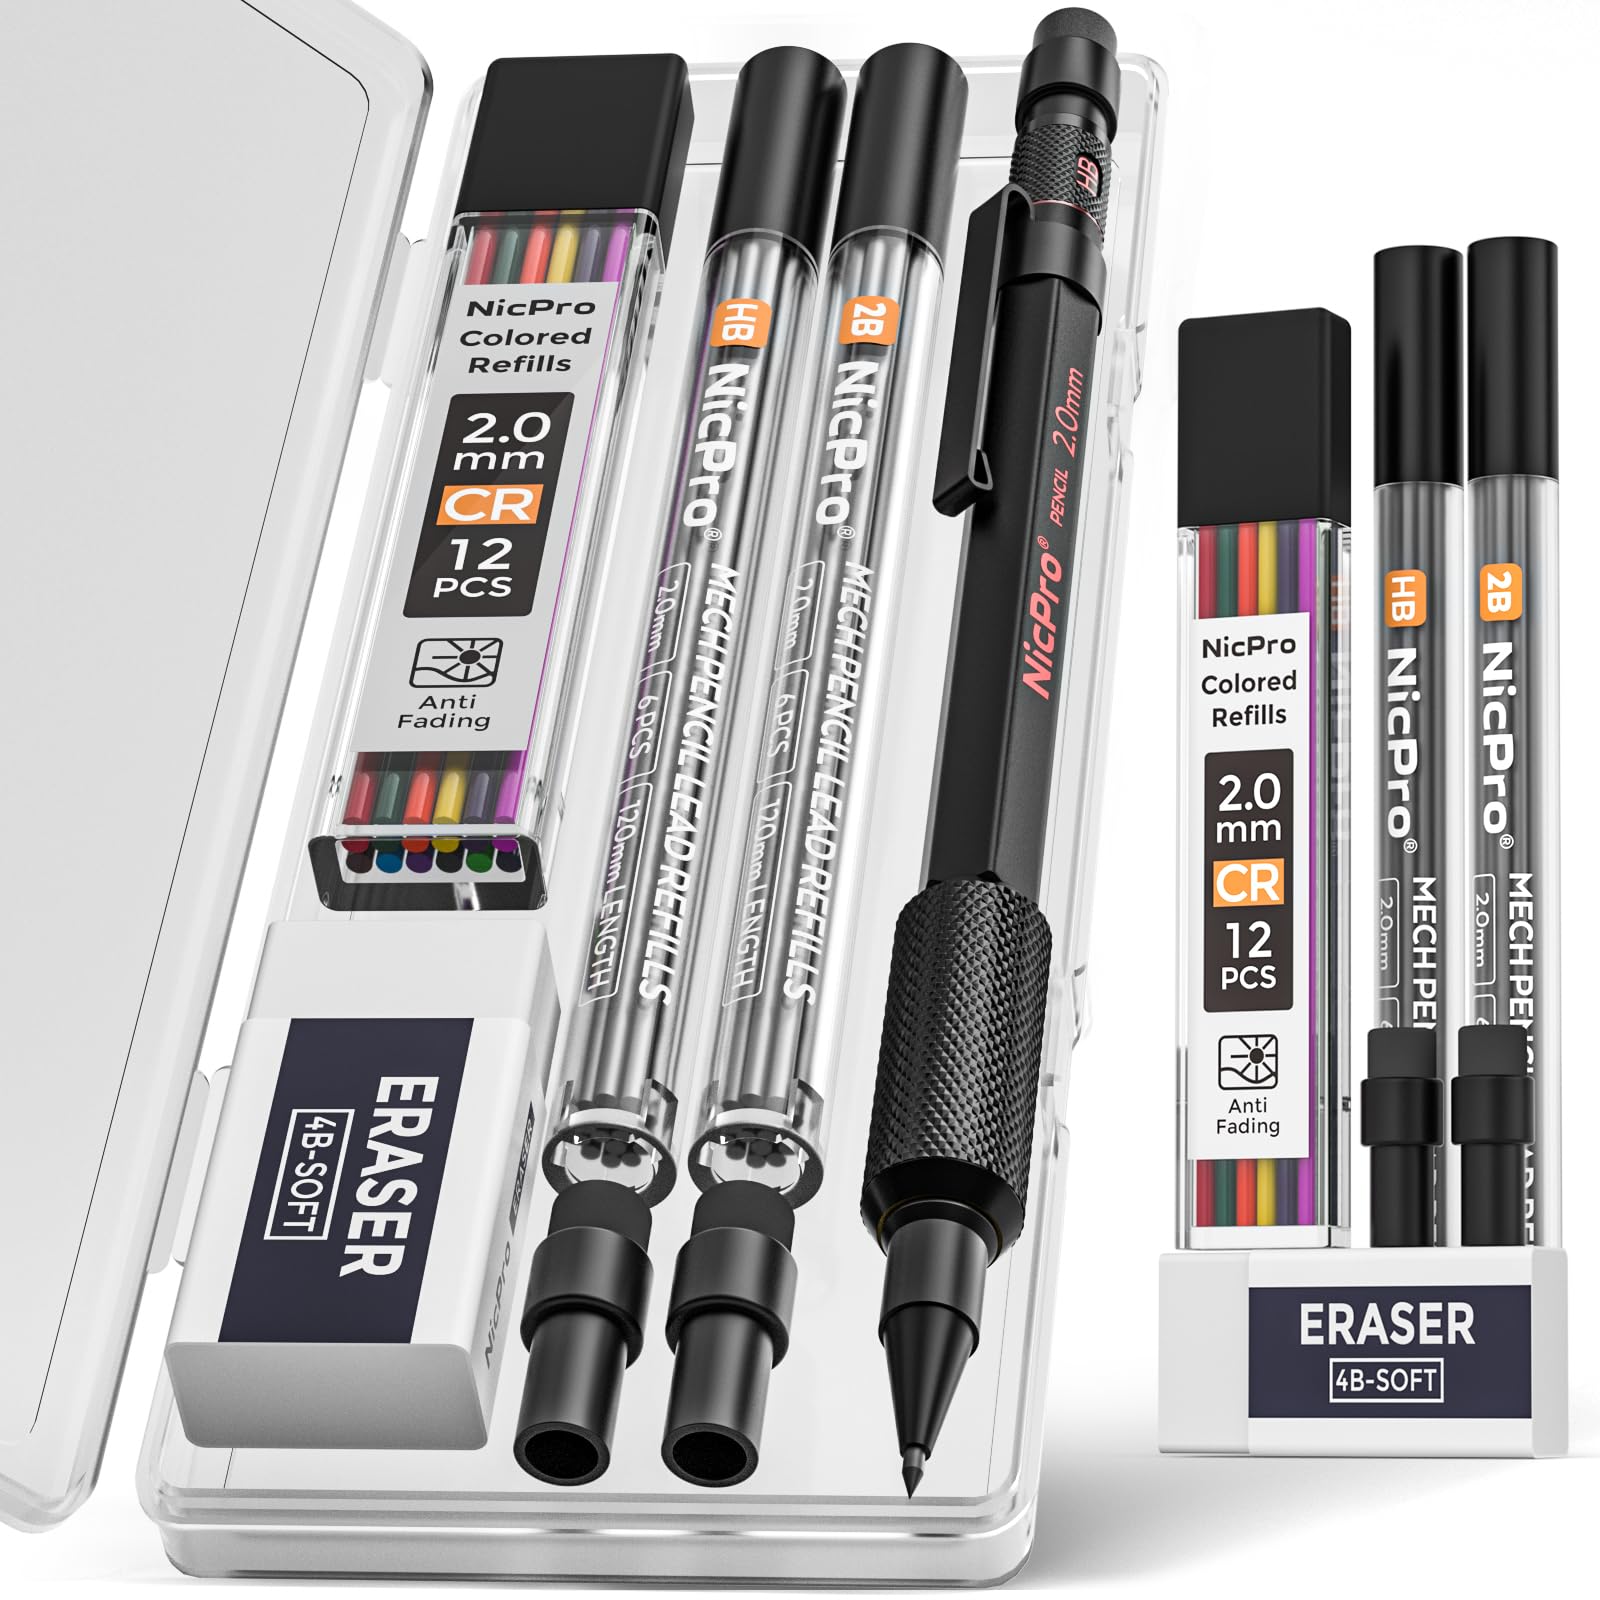 Nicpro 2.0mm Metal Mechanical Pencils, Carpenter Pencil Set with 12 Black Lead Refills, 12 Colored Lead Refills, Erasers, Come with Case